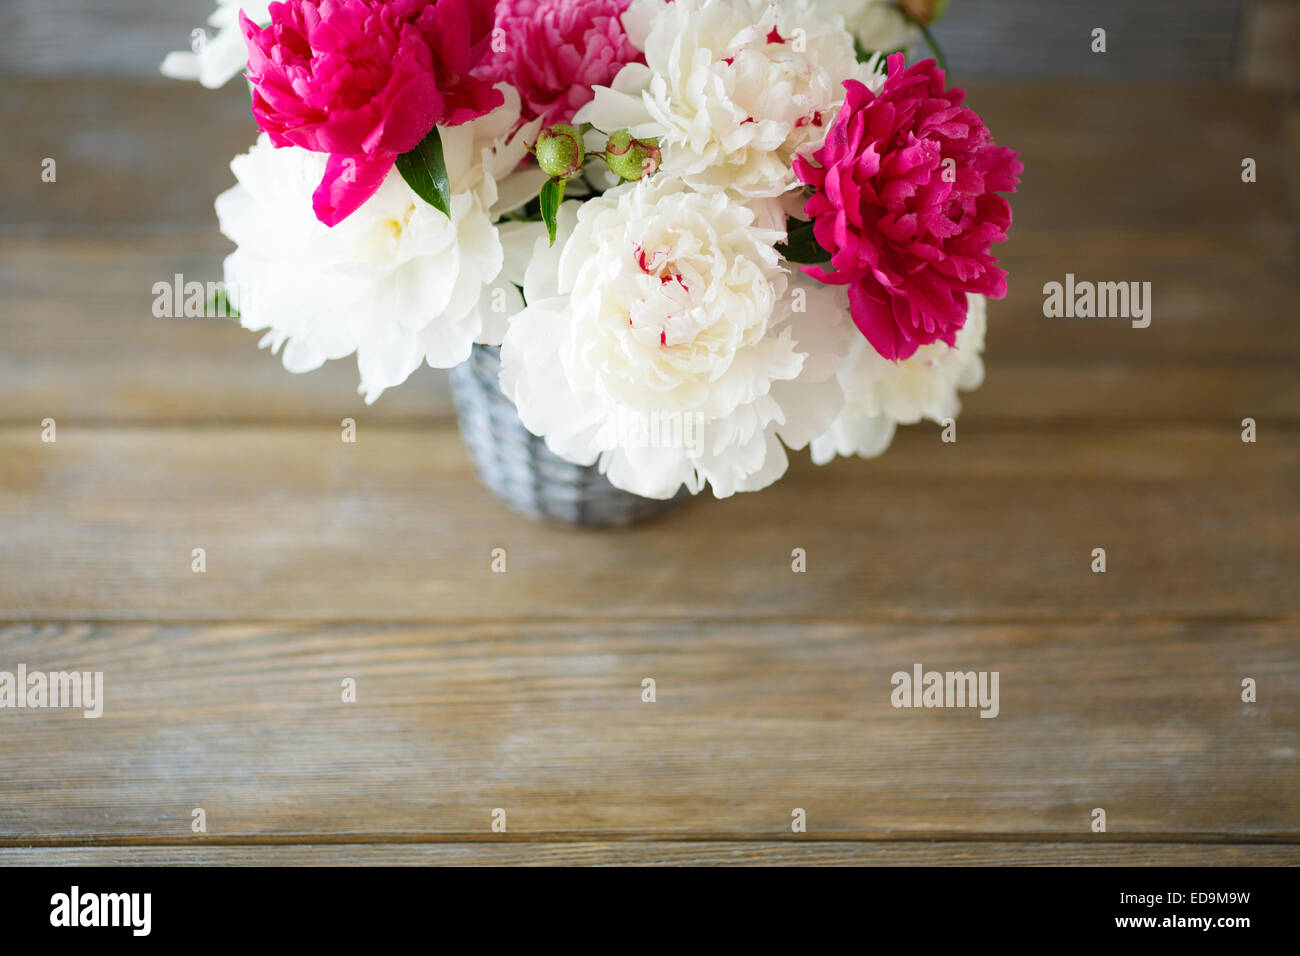 Bouquet of Peonies  in a vase, wooden background Stock Photo